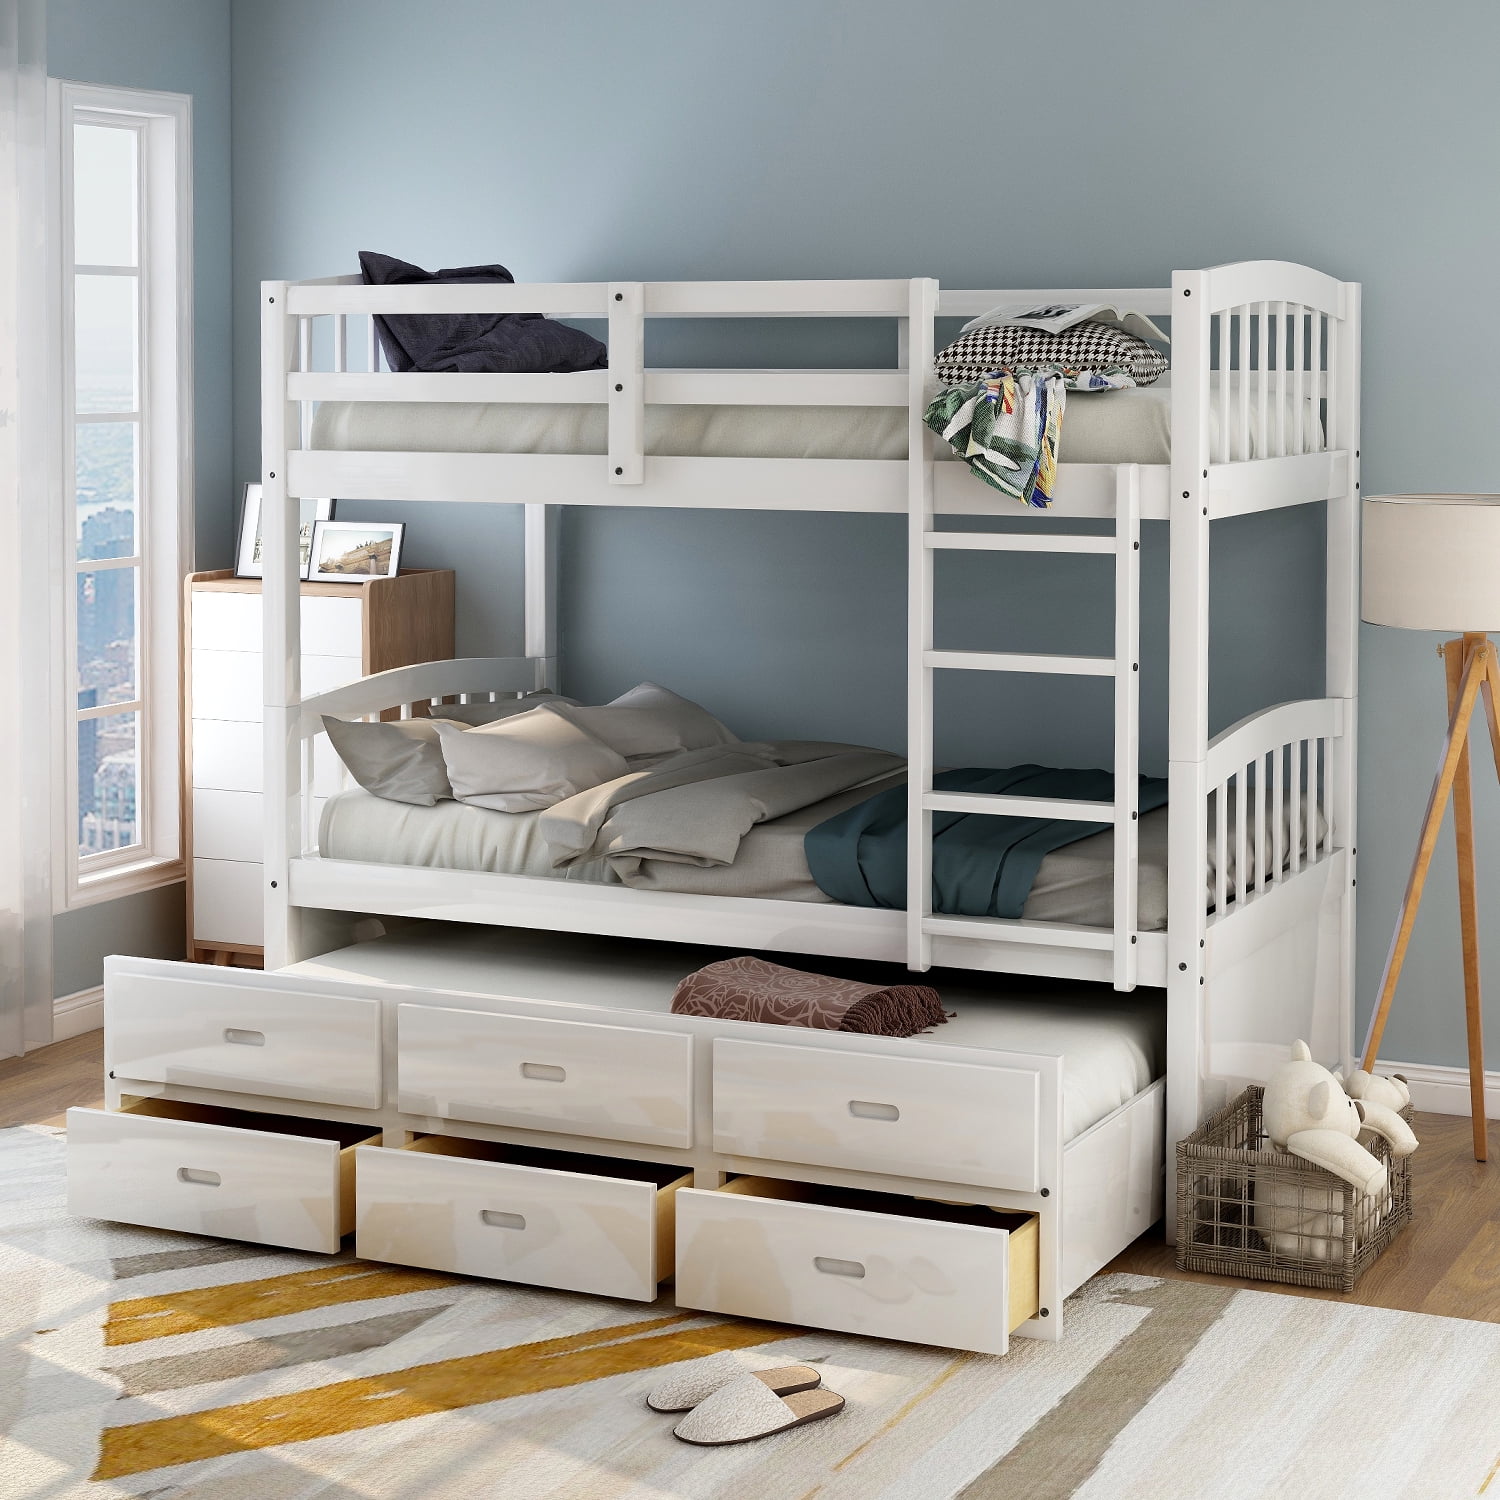 Euroco Twin Over Wood Bunk Bed, Bunk Beds With Guest Bed Underneath